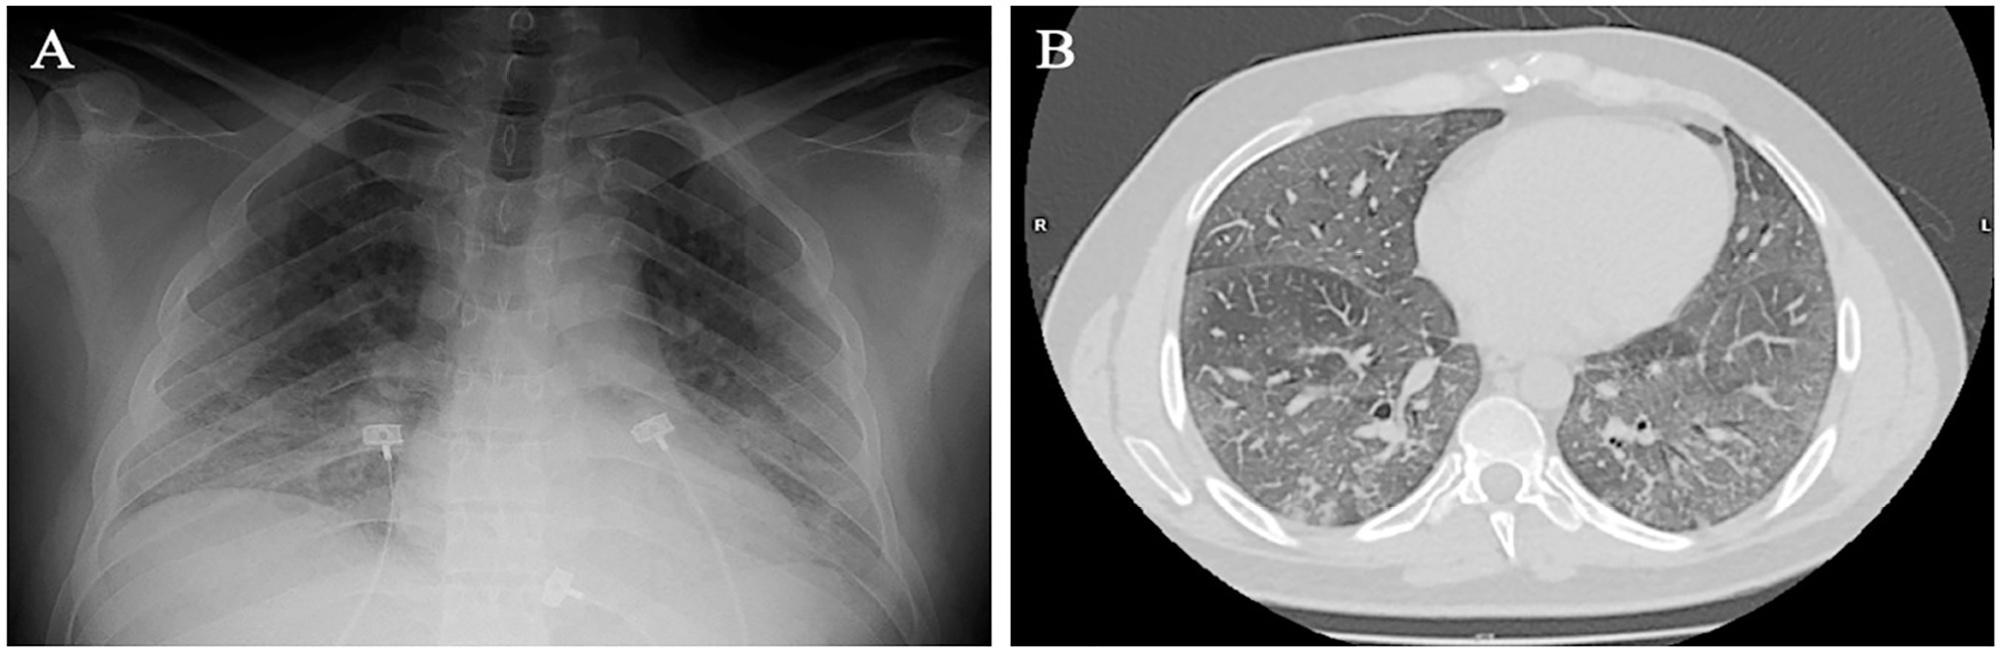 Self-inflicted lung injury: is it possible to identify the risk? A case report